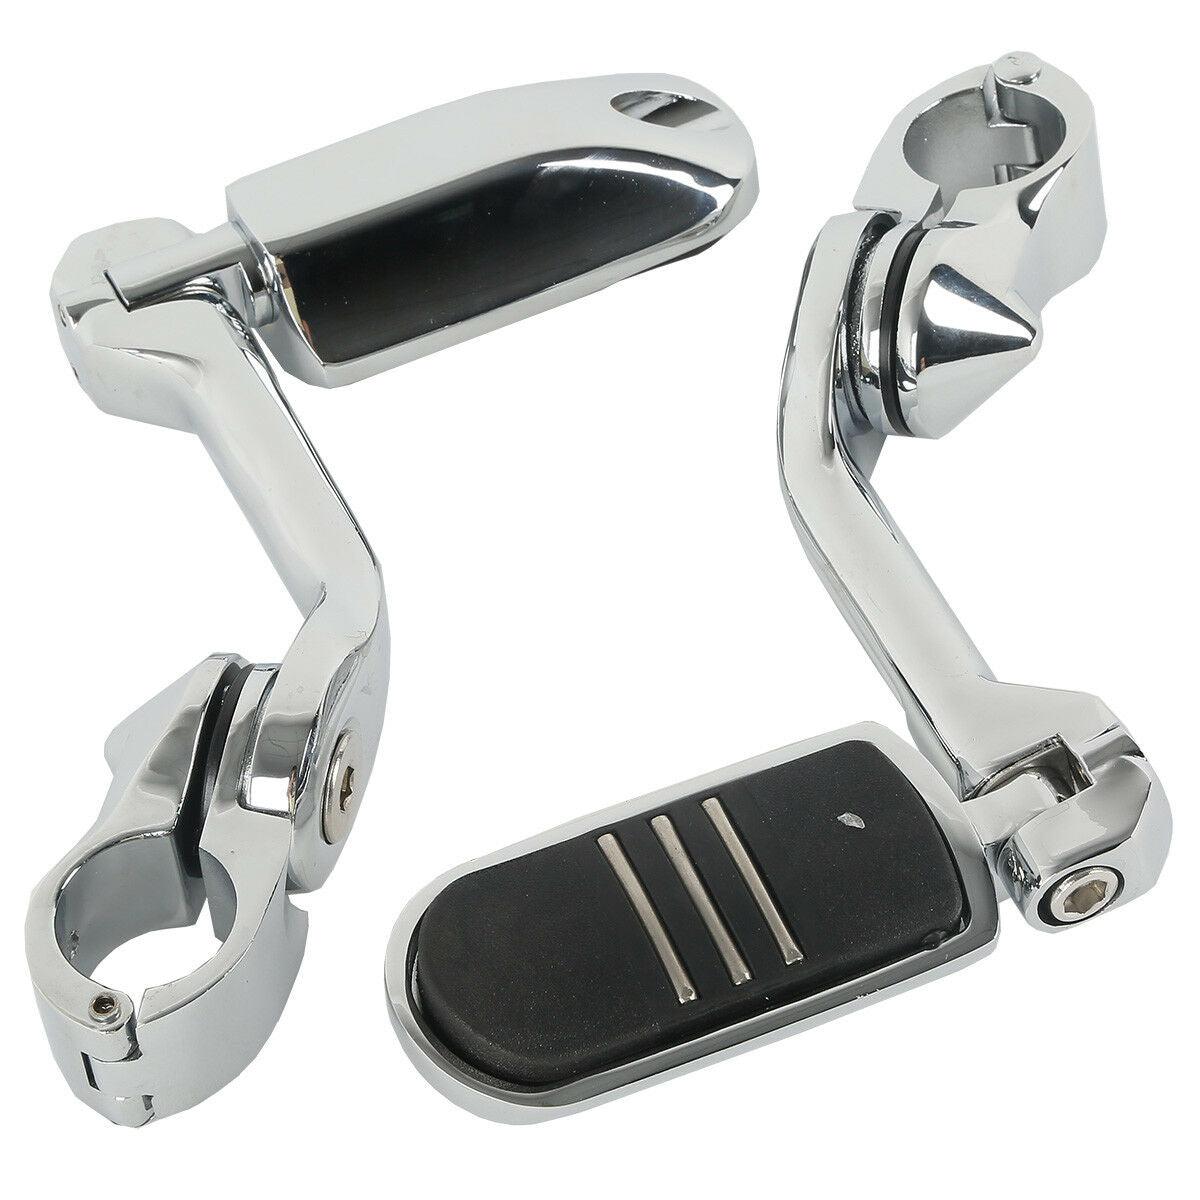 Highway Foot Pegs Rest Fit For Harley 1-1/4" Touring Electra Road Street Glide - Moto Life Products